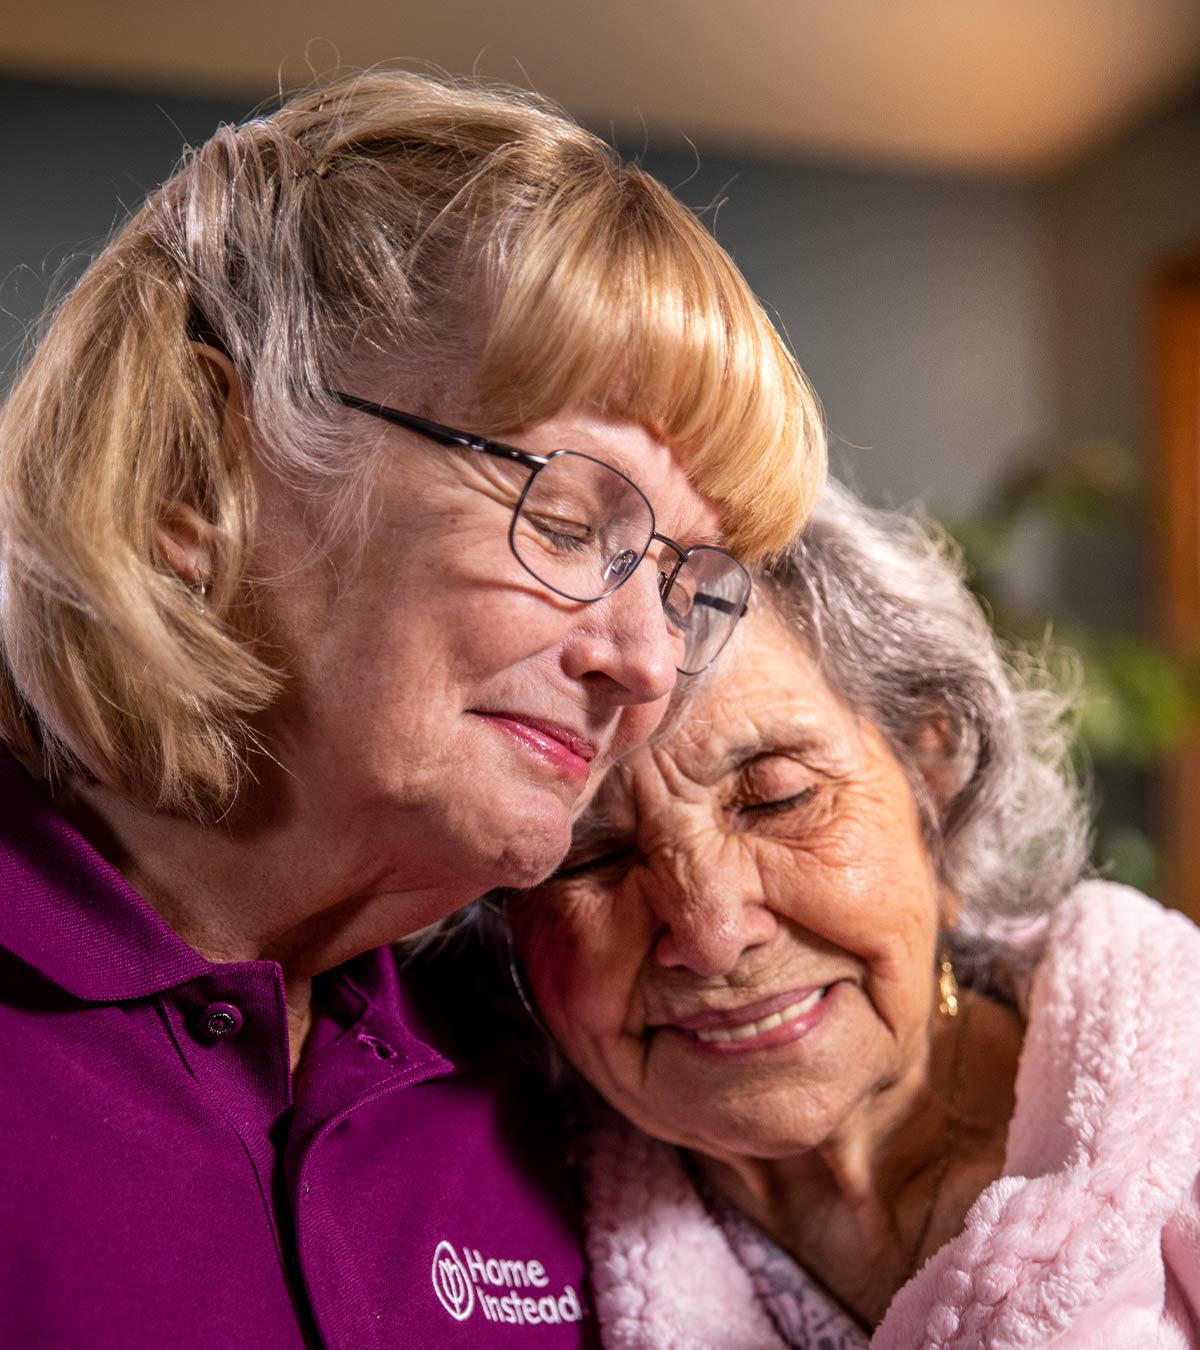 CAREGiver providing in-home senior care services. Home Instead of Clawson, MI provides Elder Care to aging adults. 